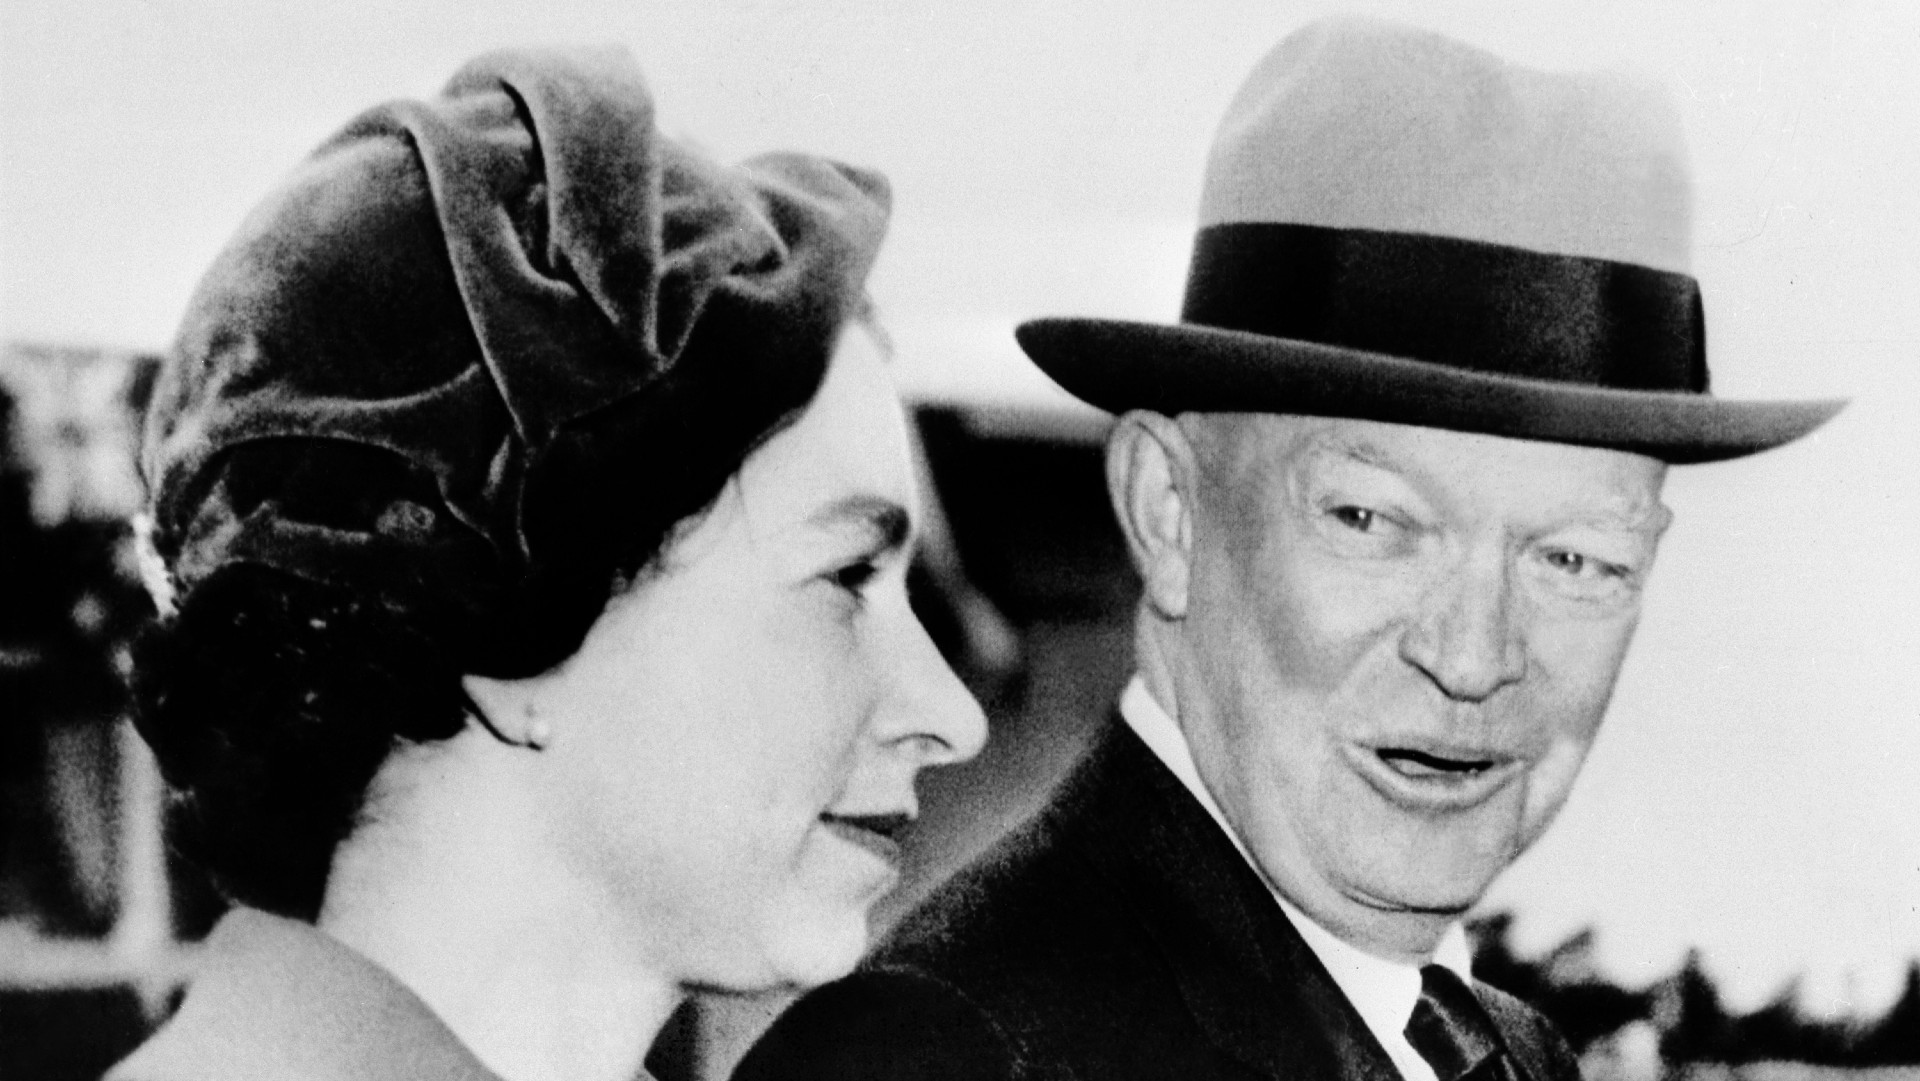 Dwight D. Eisenhower and the Queen